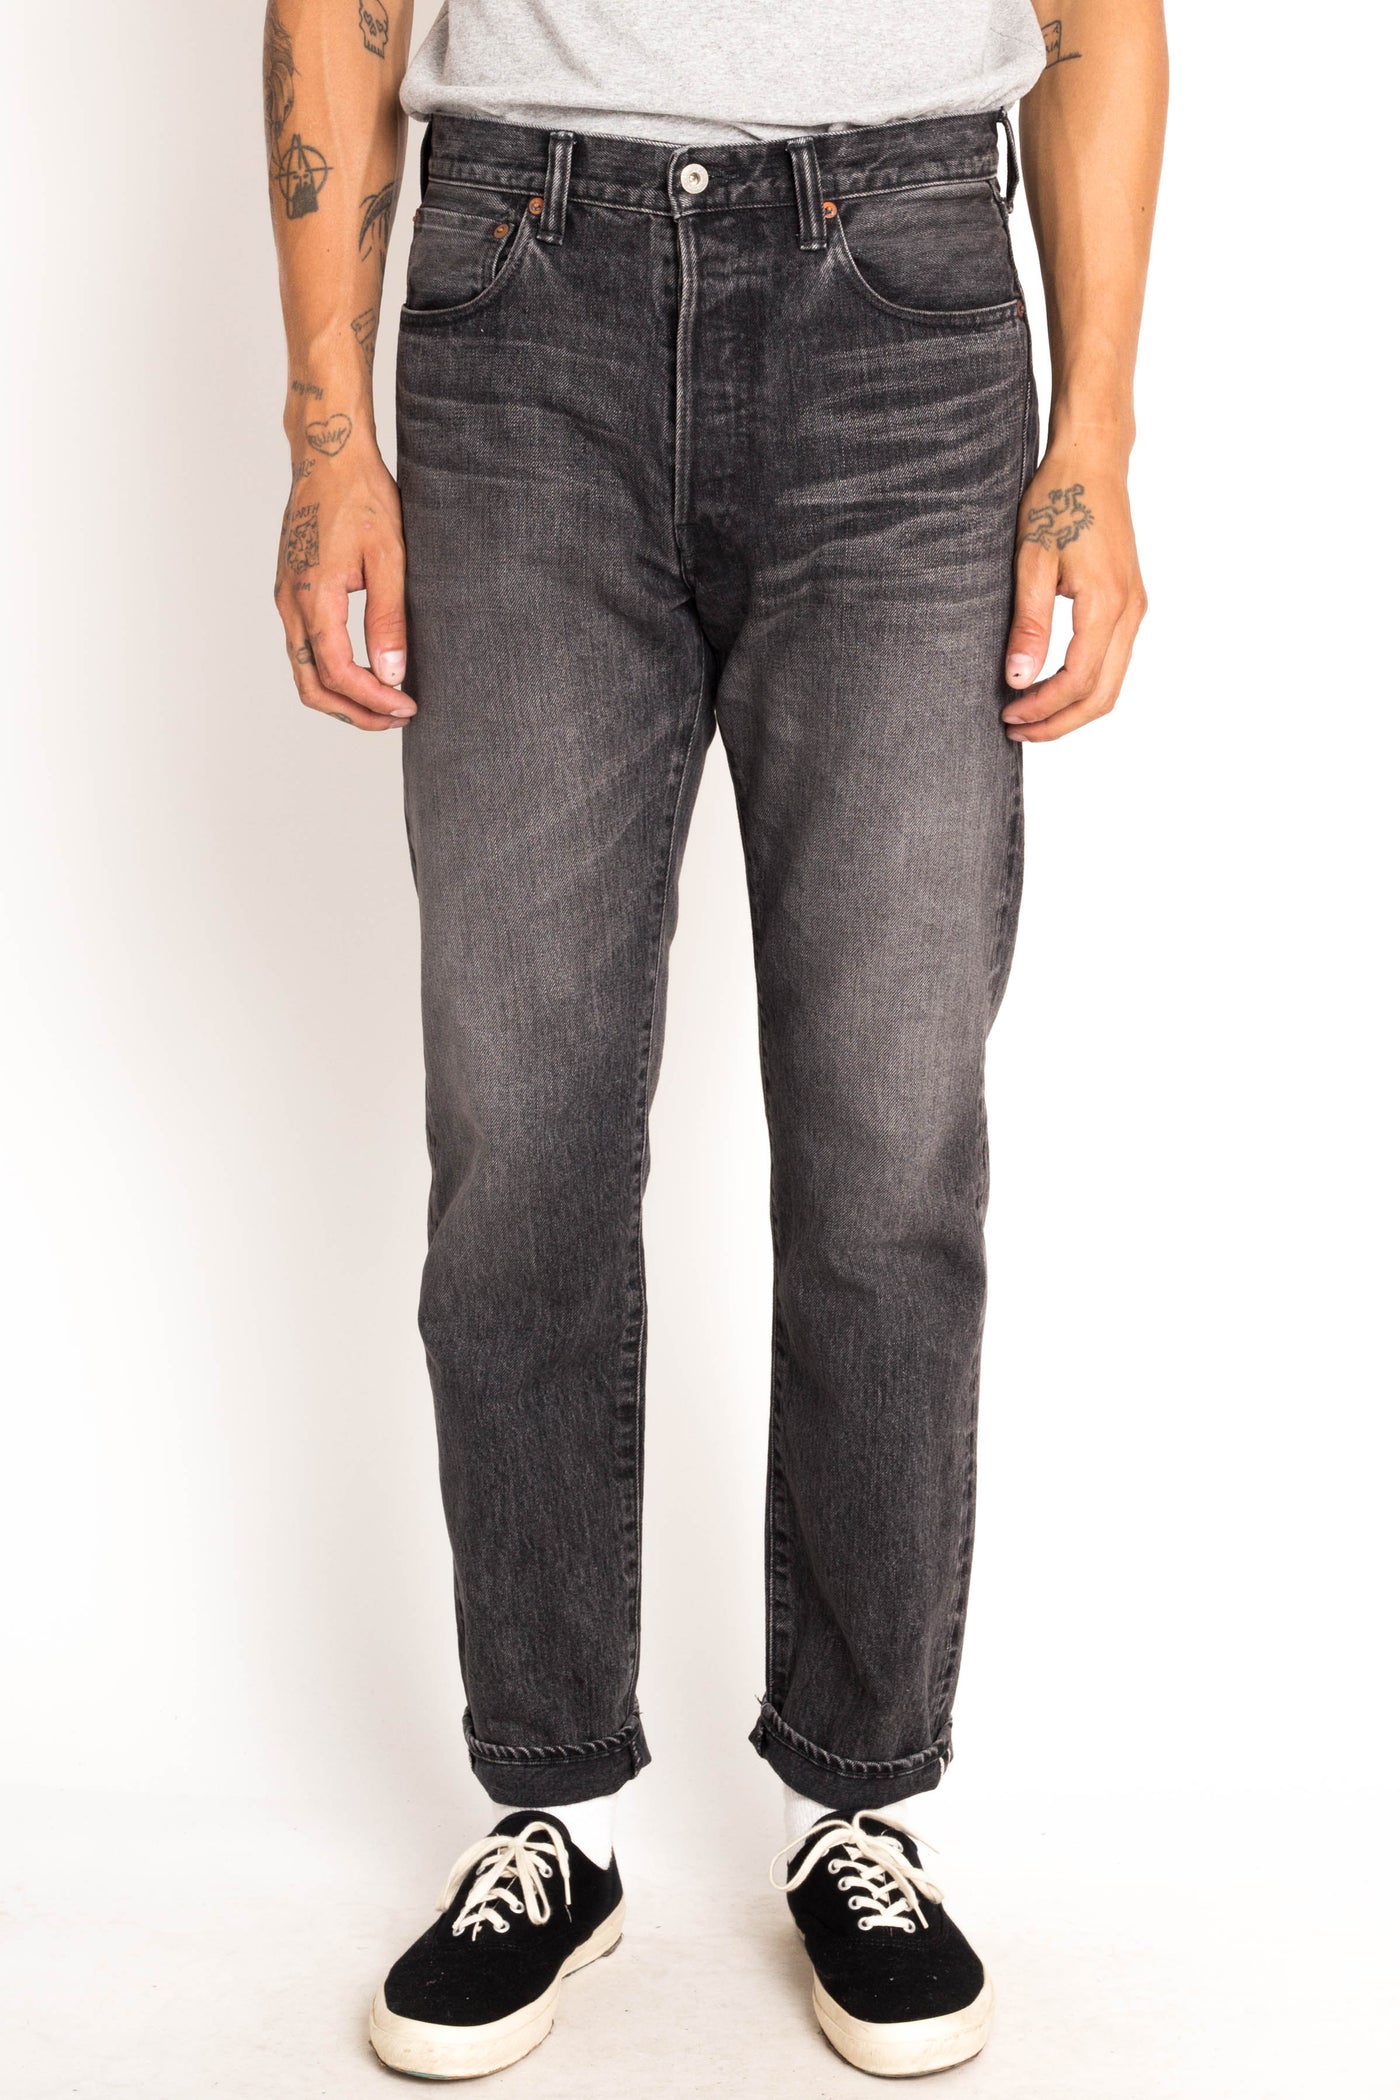 Cee Jeanss C212 - Faded Black